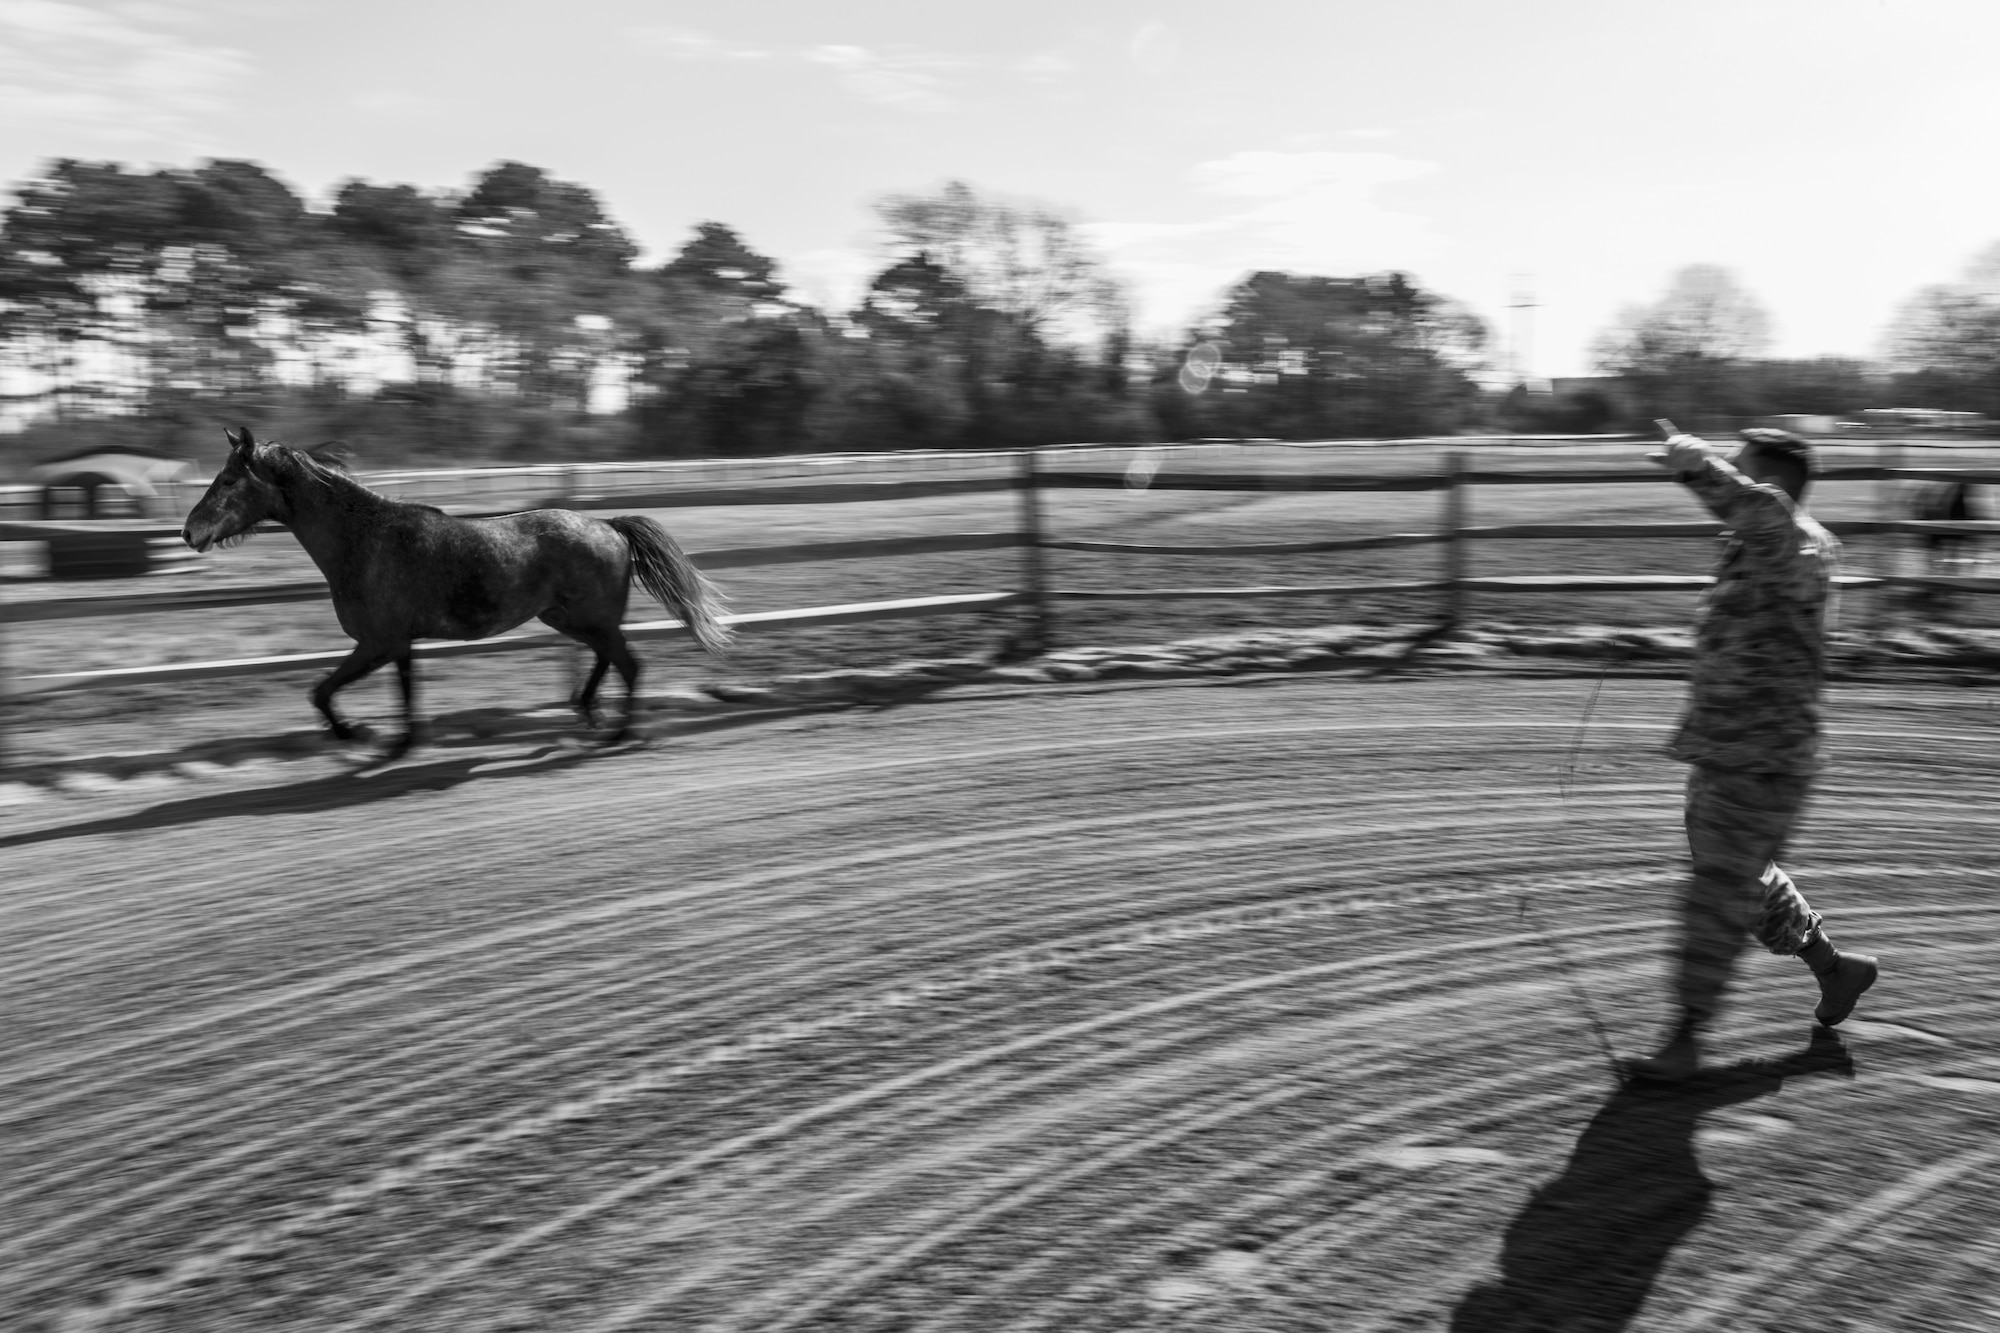 U.S. Air Force Staff Sgt. Cody Wisley, 83rd Network Operations Squadron boundary protection supervisor, has his horse Steel run in a round pen at Joint Base Langley-Eustis, Virginia, April 12, 2018.